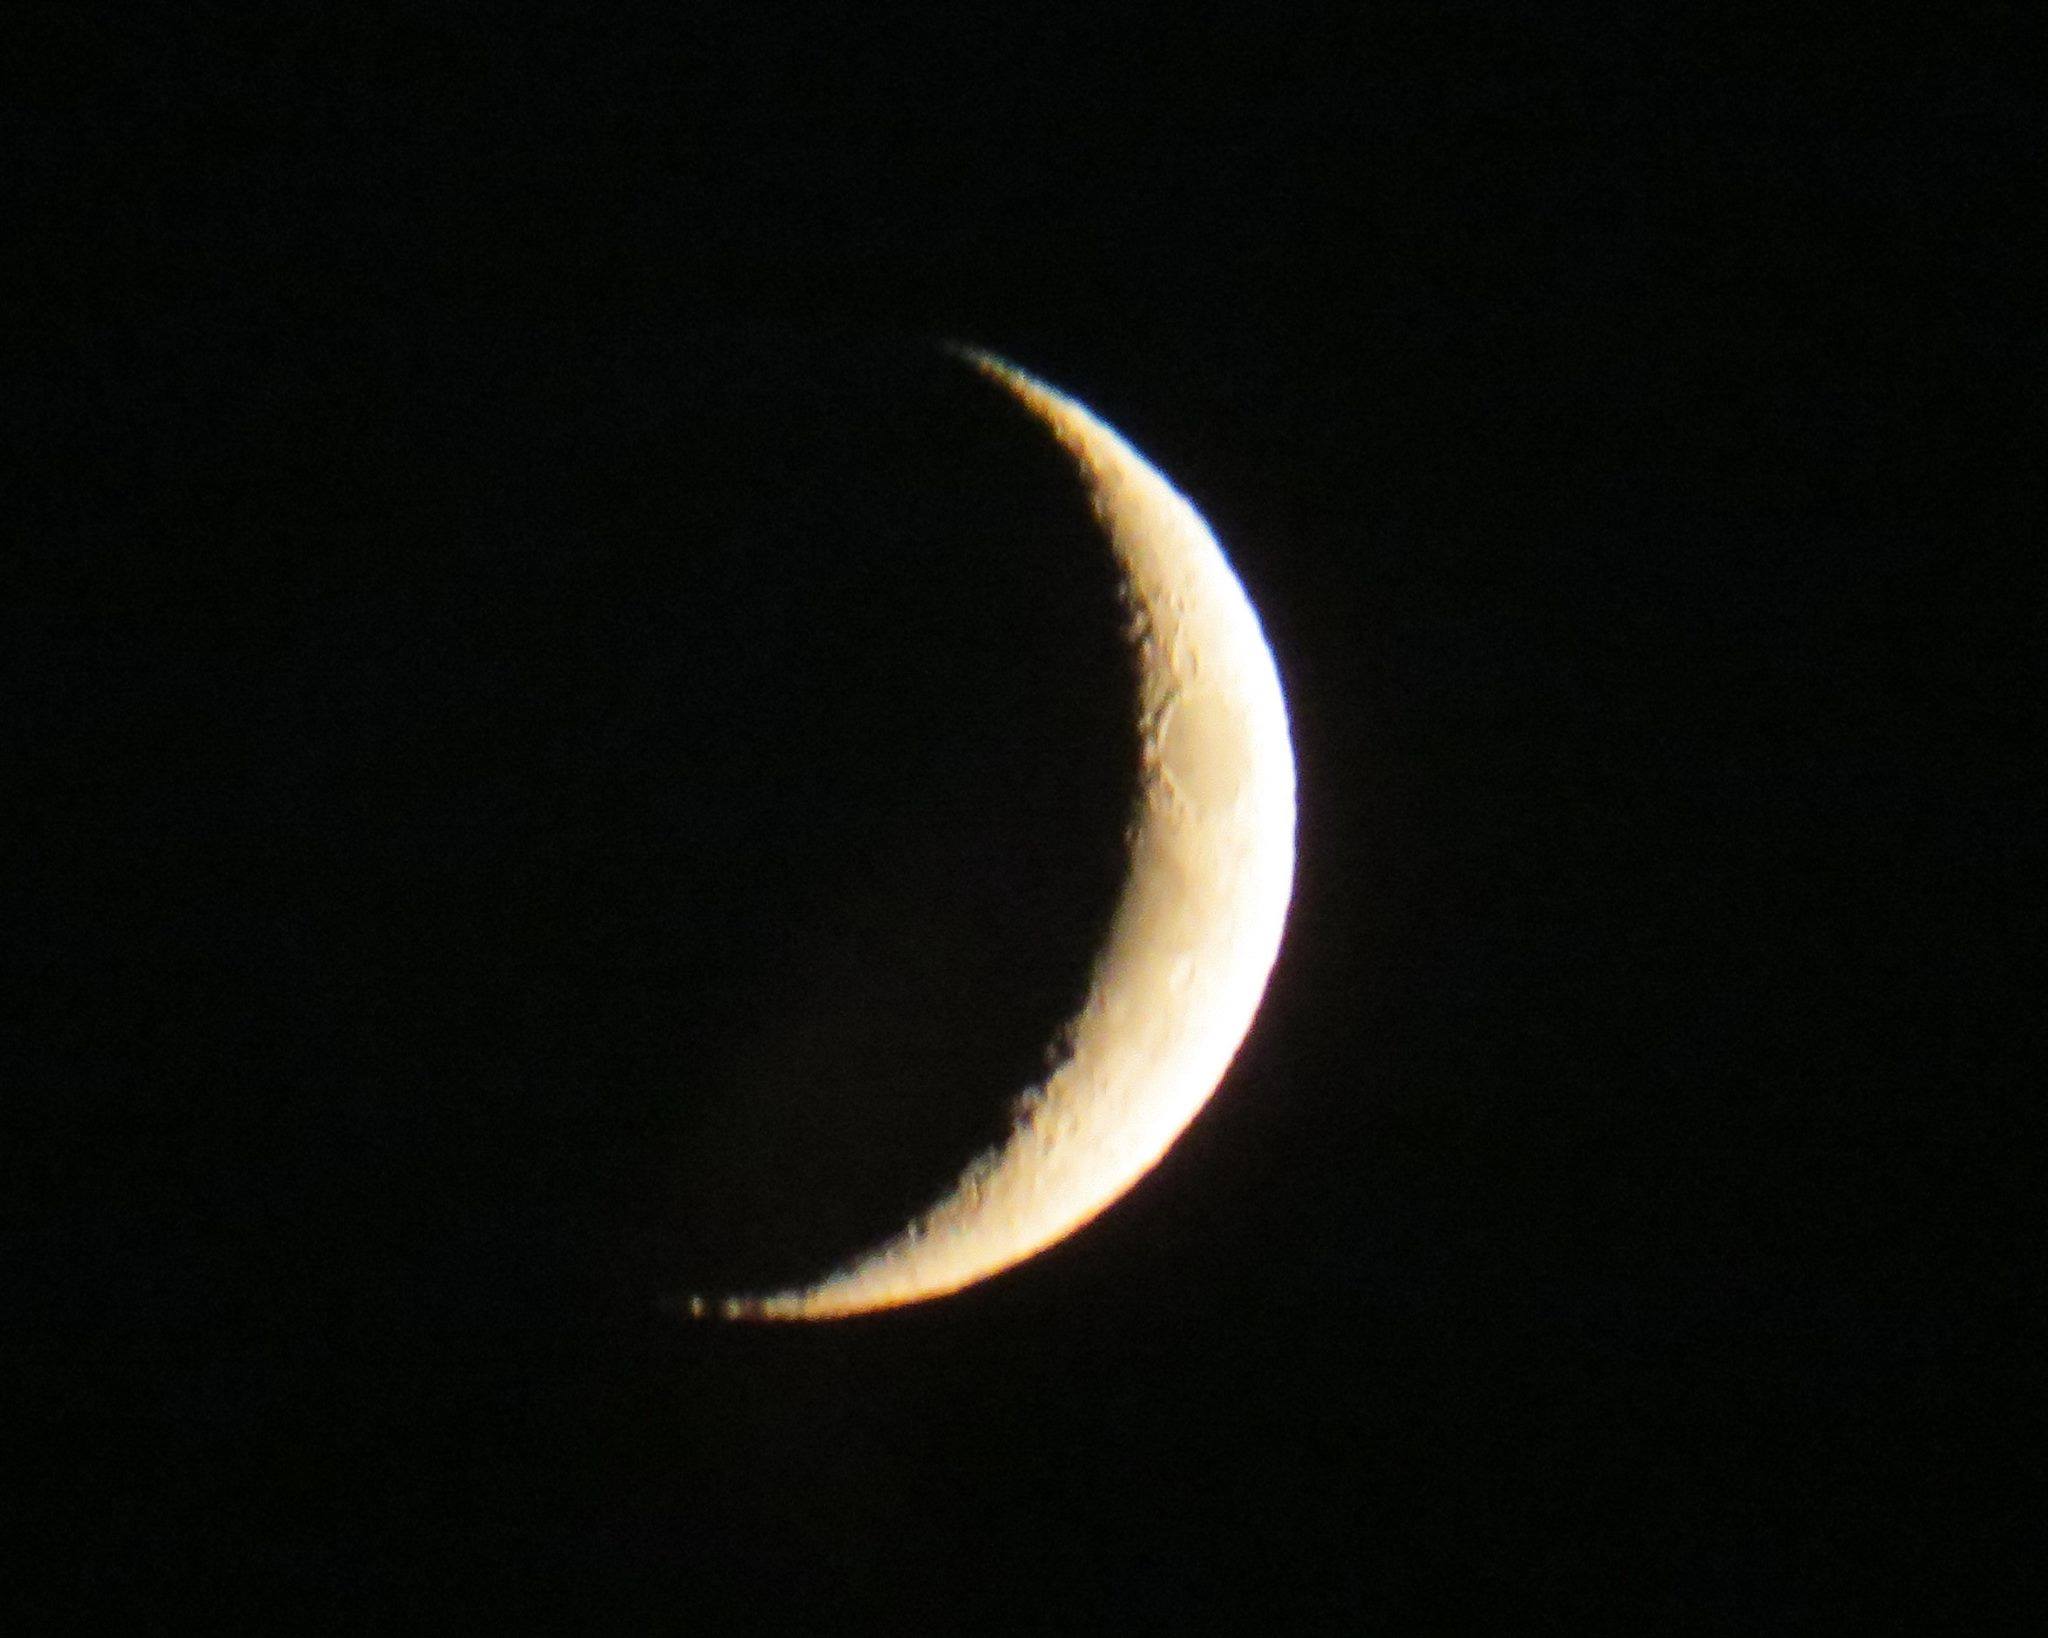 The first crescent moon appeared the night following the new moon. Not the best time for fishing!